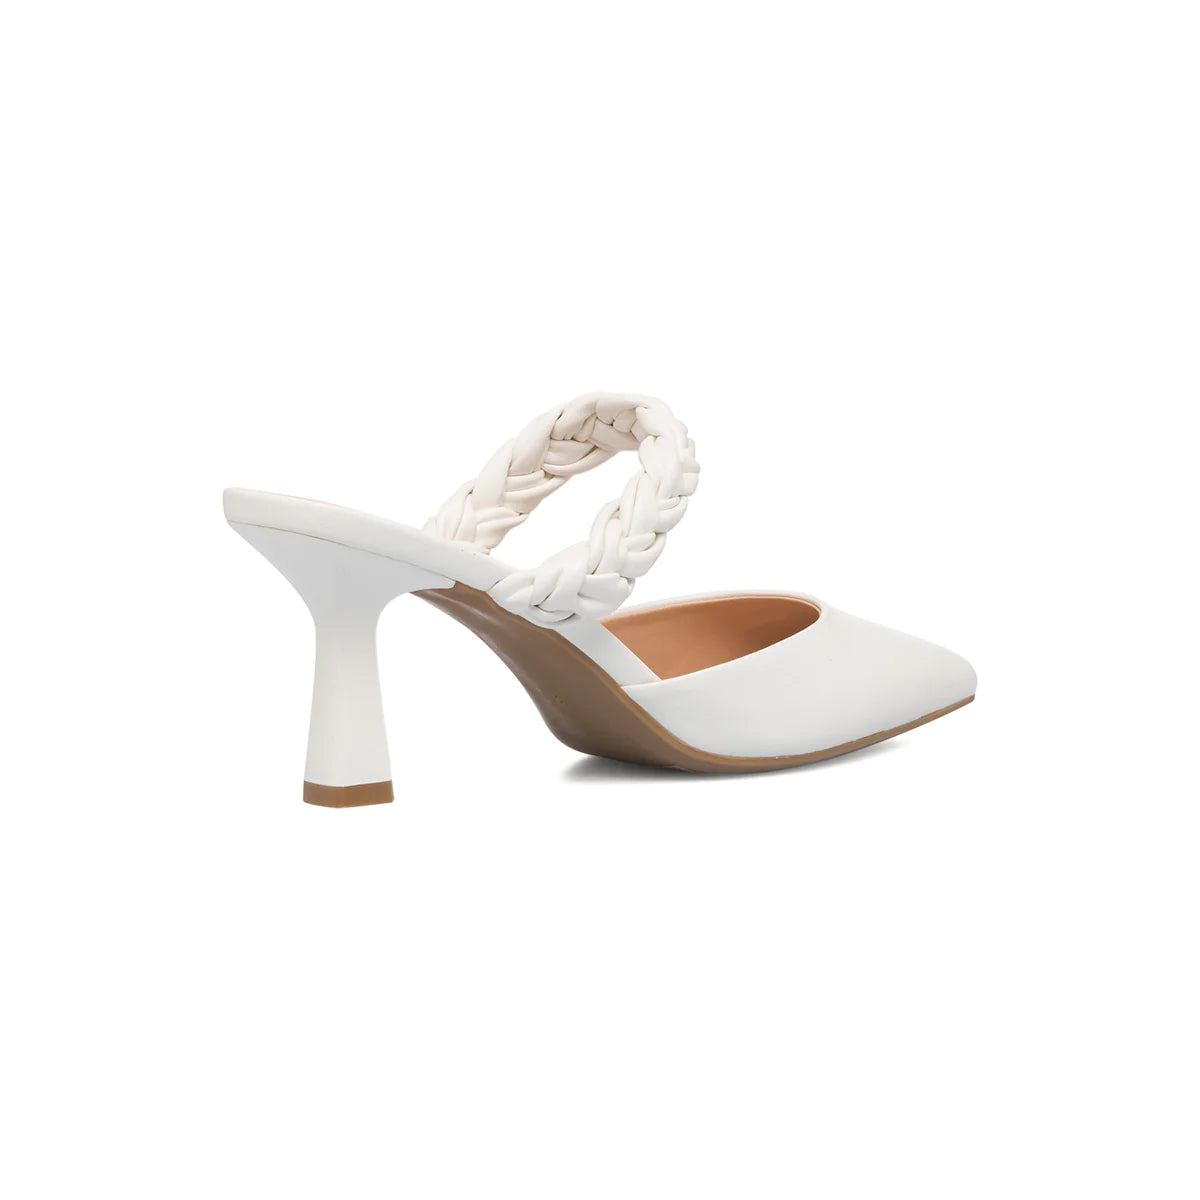 LORA FERRES WHITE POINTED TOE MULE